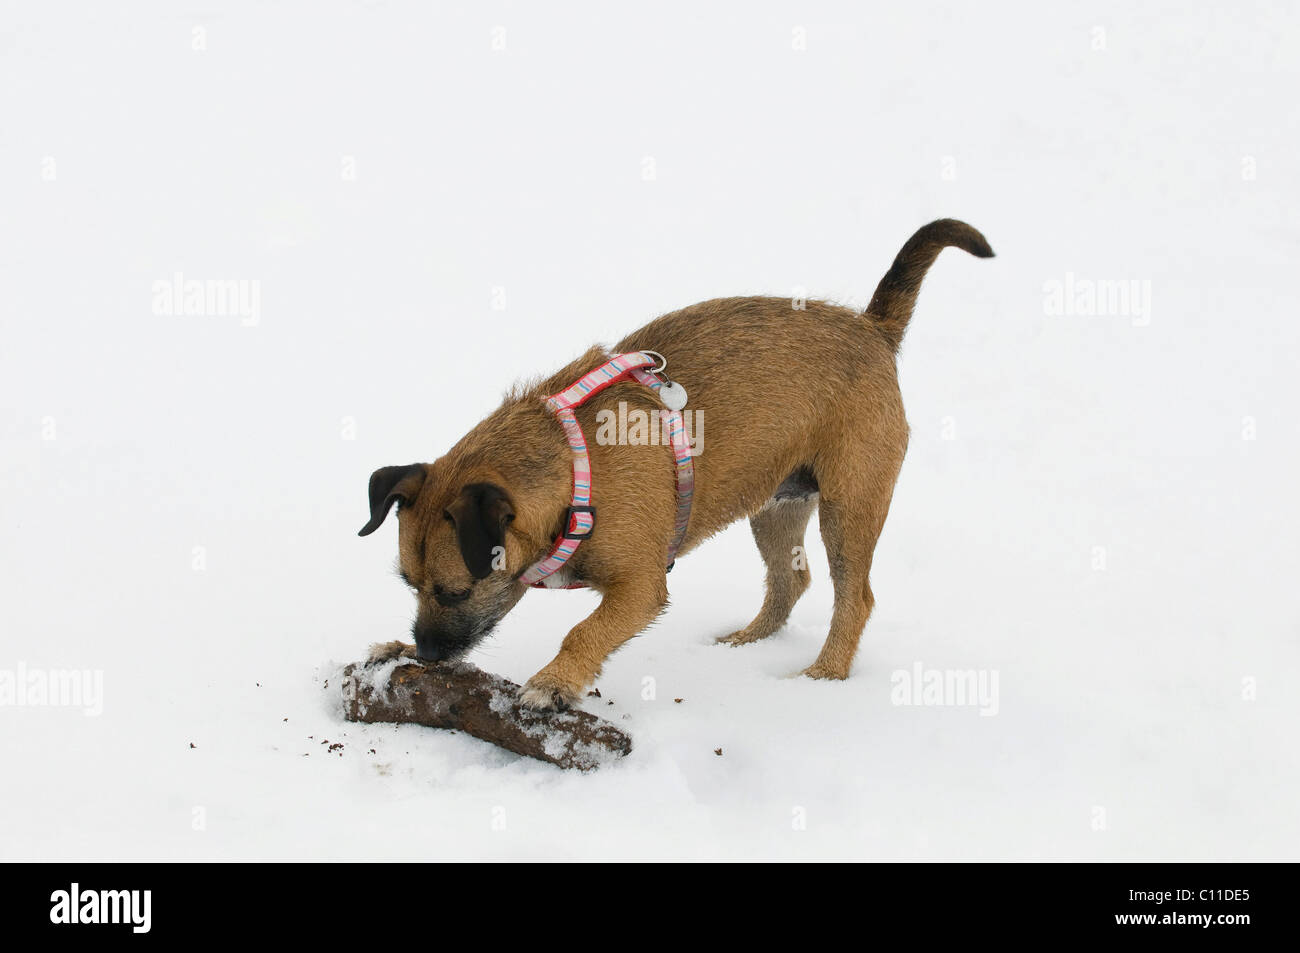 Brown terrier crossbreed digging, biting and scratching a large stick for retrieving in the snow Stock Photo